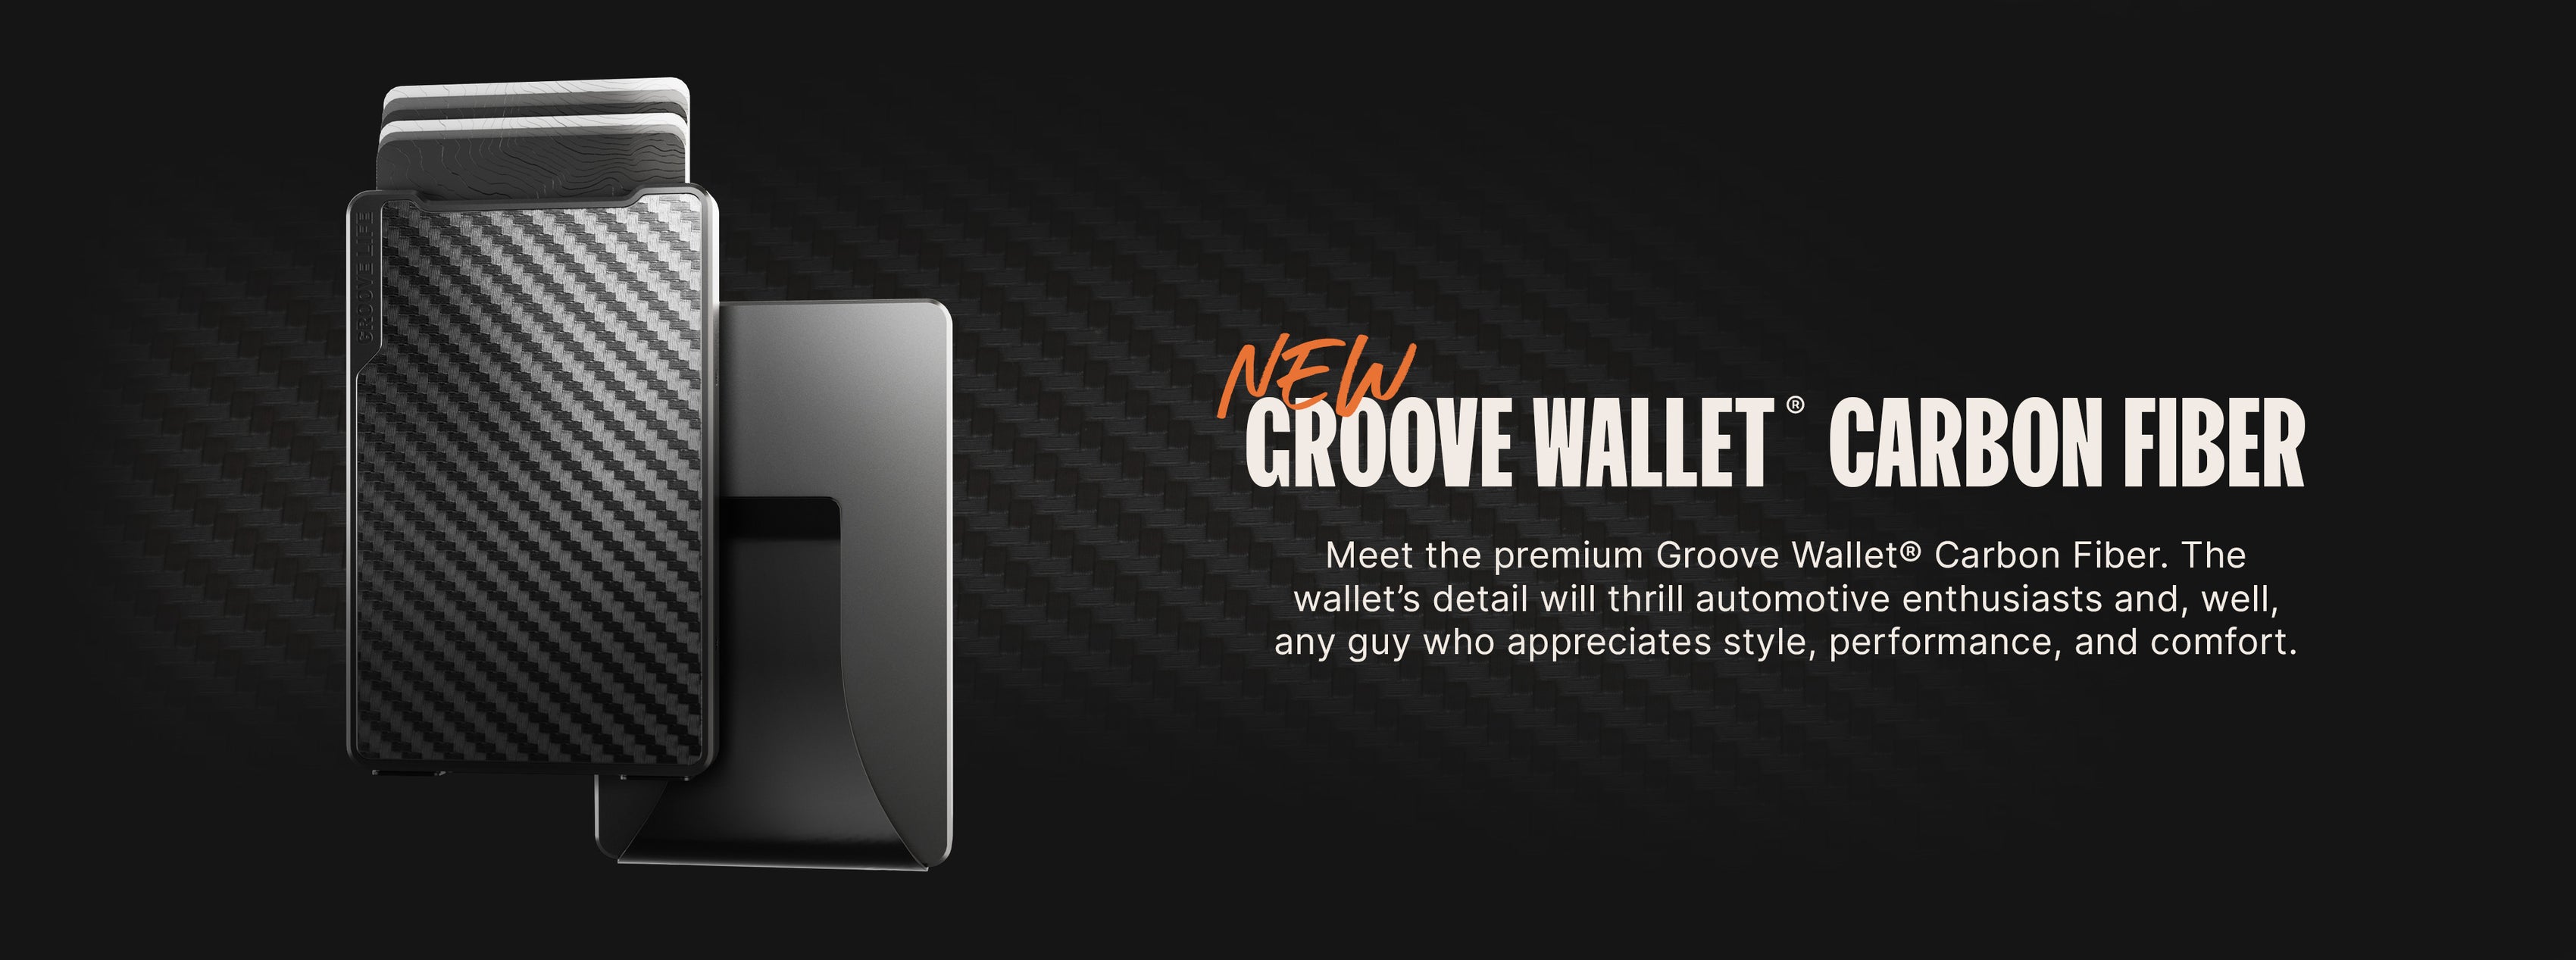 New Groove Wallet Carbon Fiber. Meet the premium Groove Wallet Carbon Fiber. The wallet's detail will thrill automotive enthusiasts and, well, any guy who appreciates style, performance, and comfort.